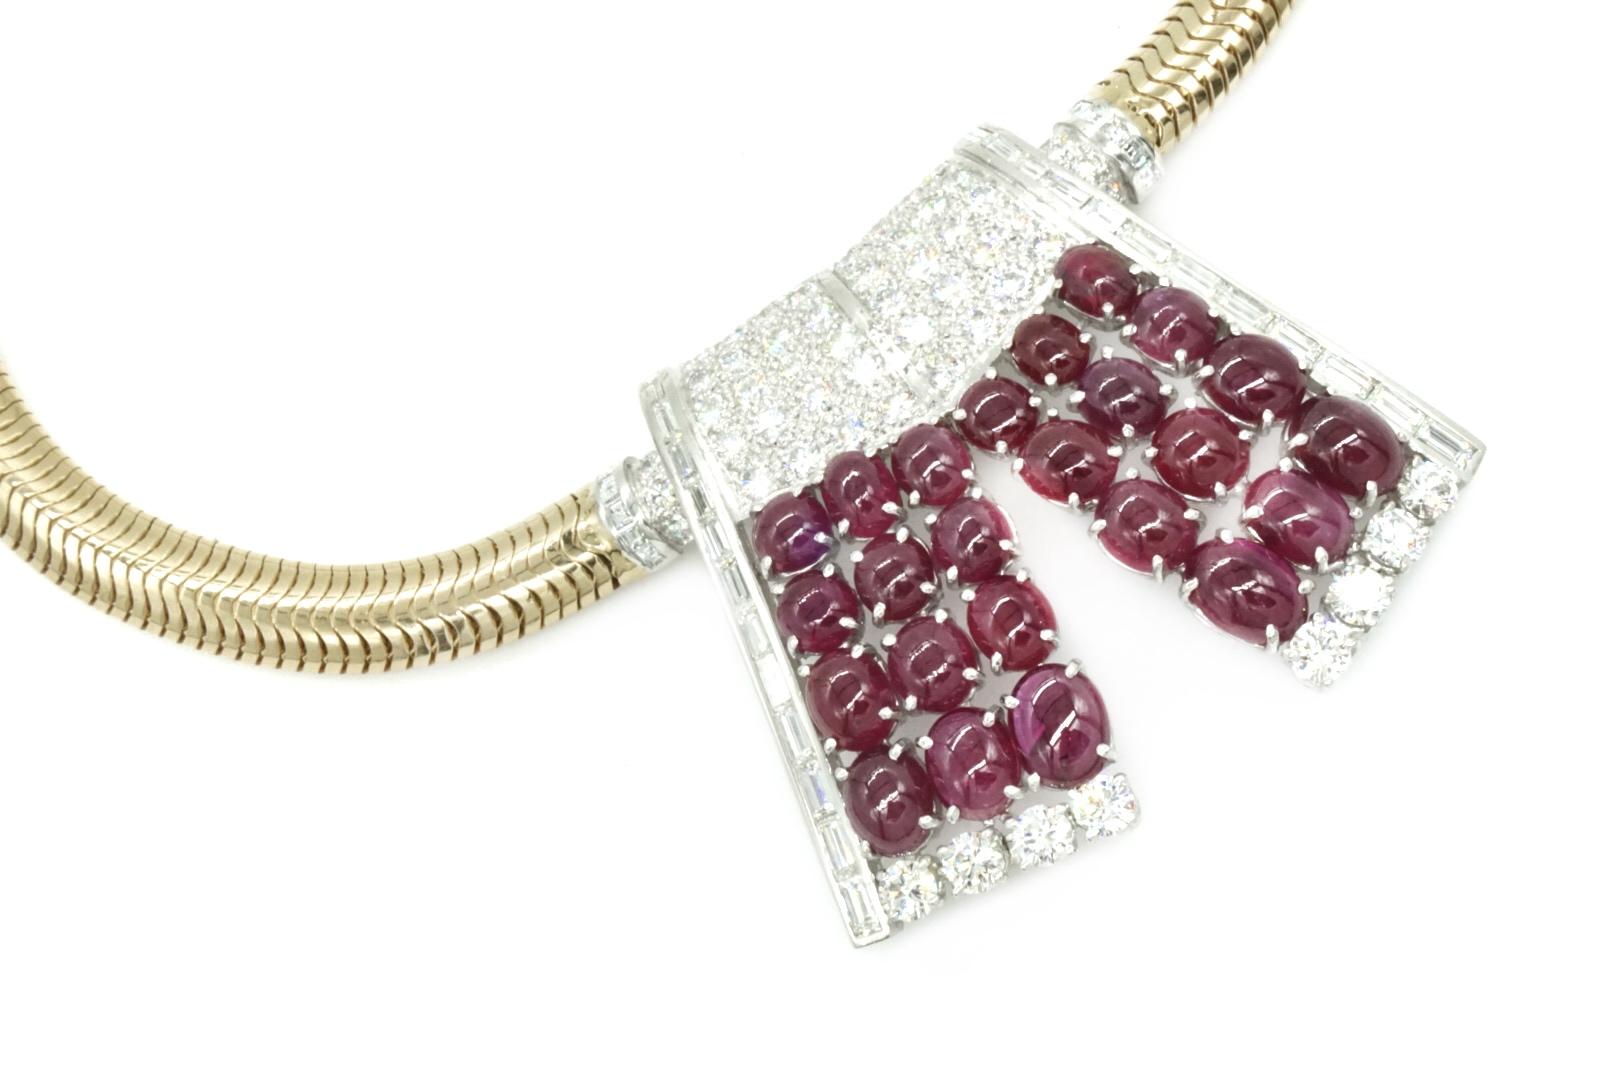 A stunning drop necklace with cabochon rubies and diamonds mounted in white and yellow gold. Made in the US, circa 1970